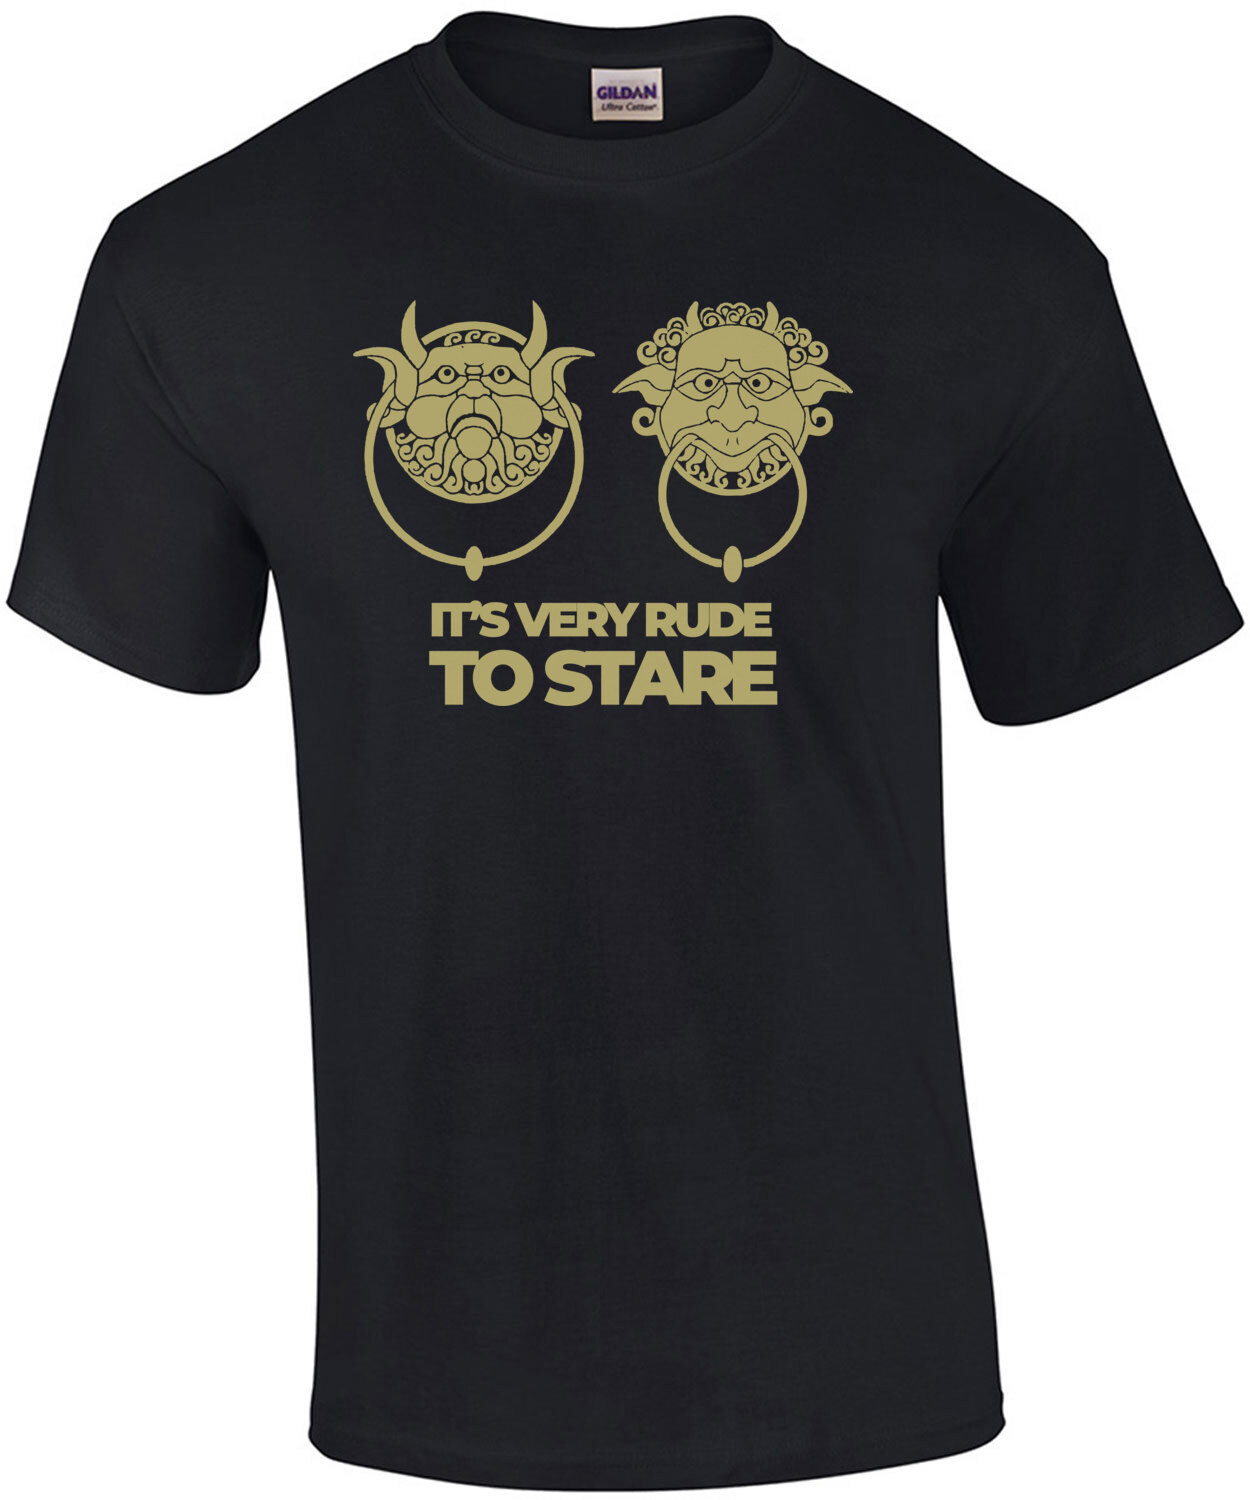 It's very rude to stare - door knockers - Labyrinth 80's T-Shirt